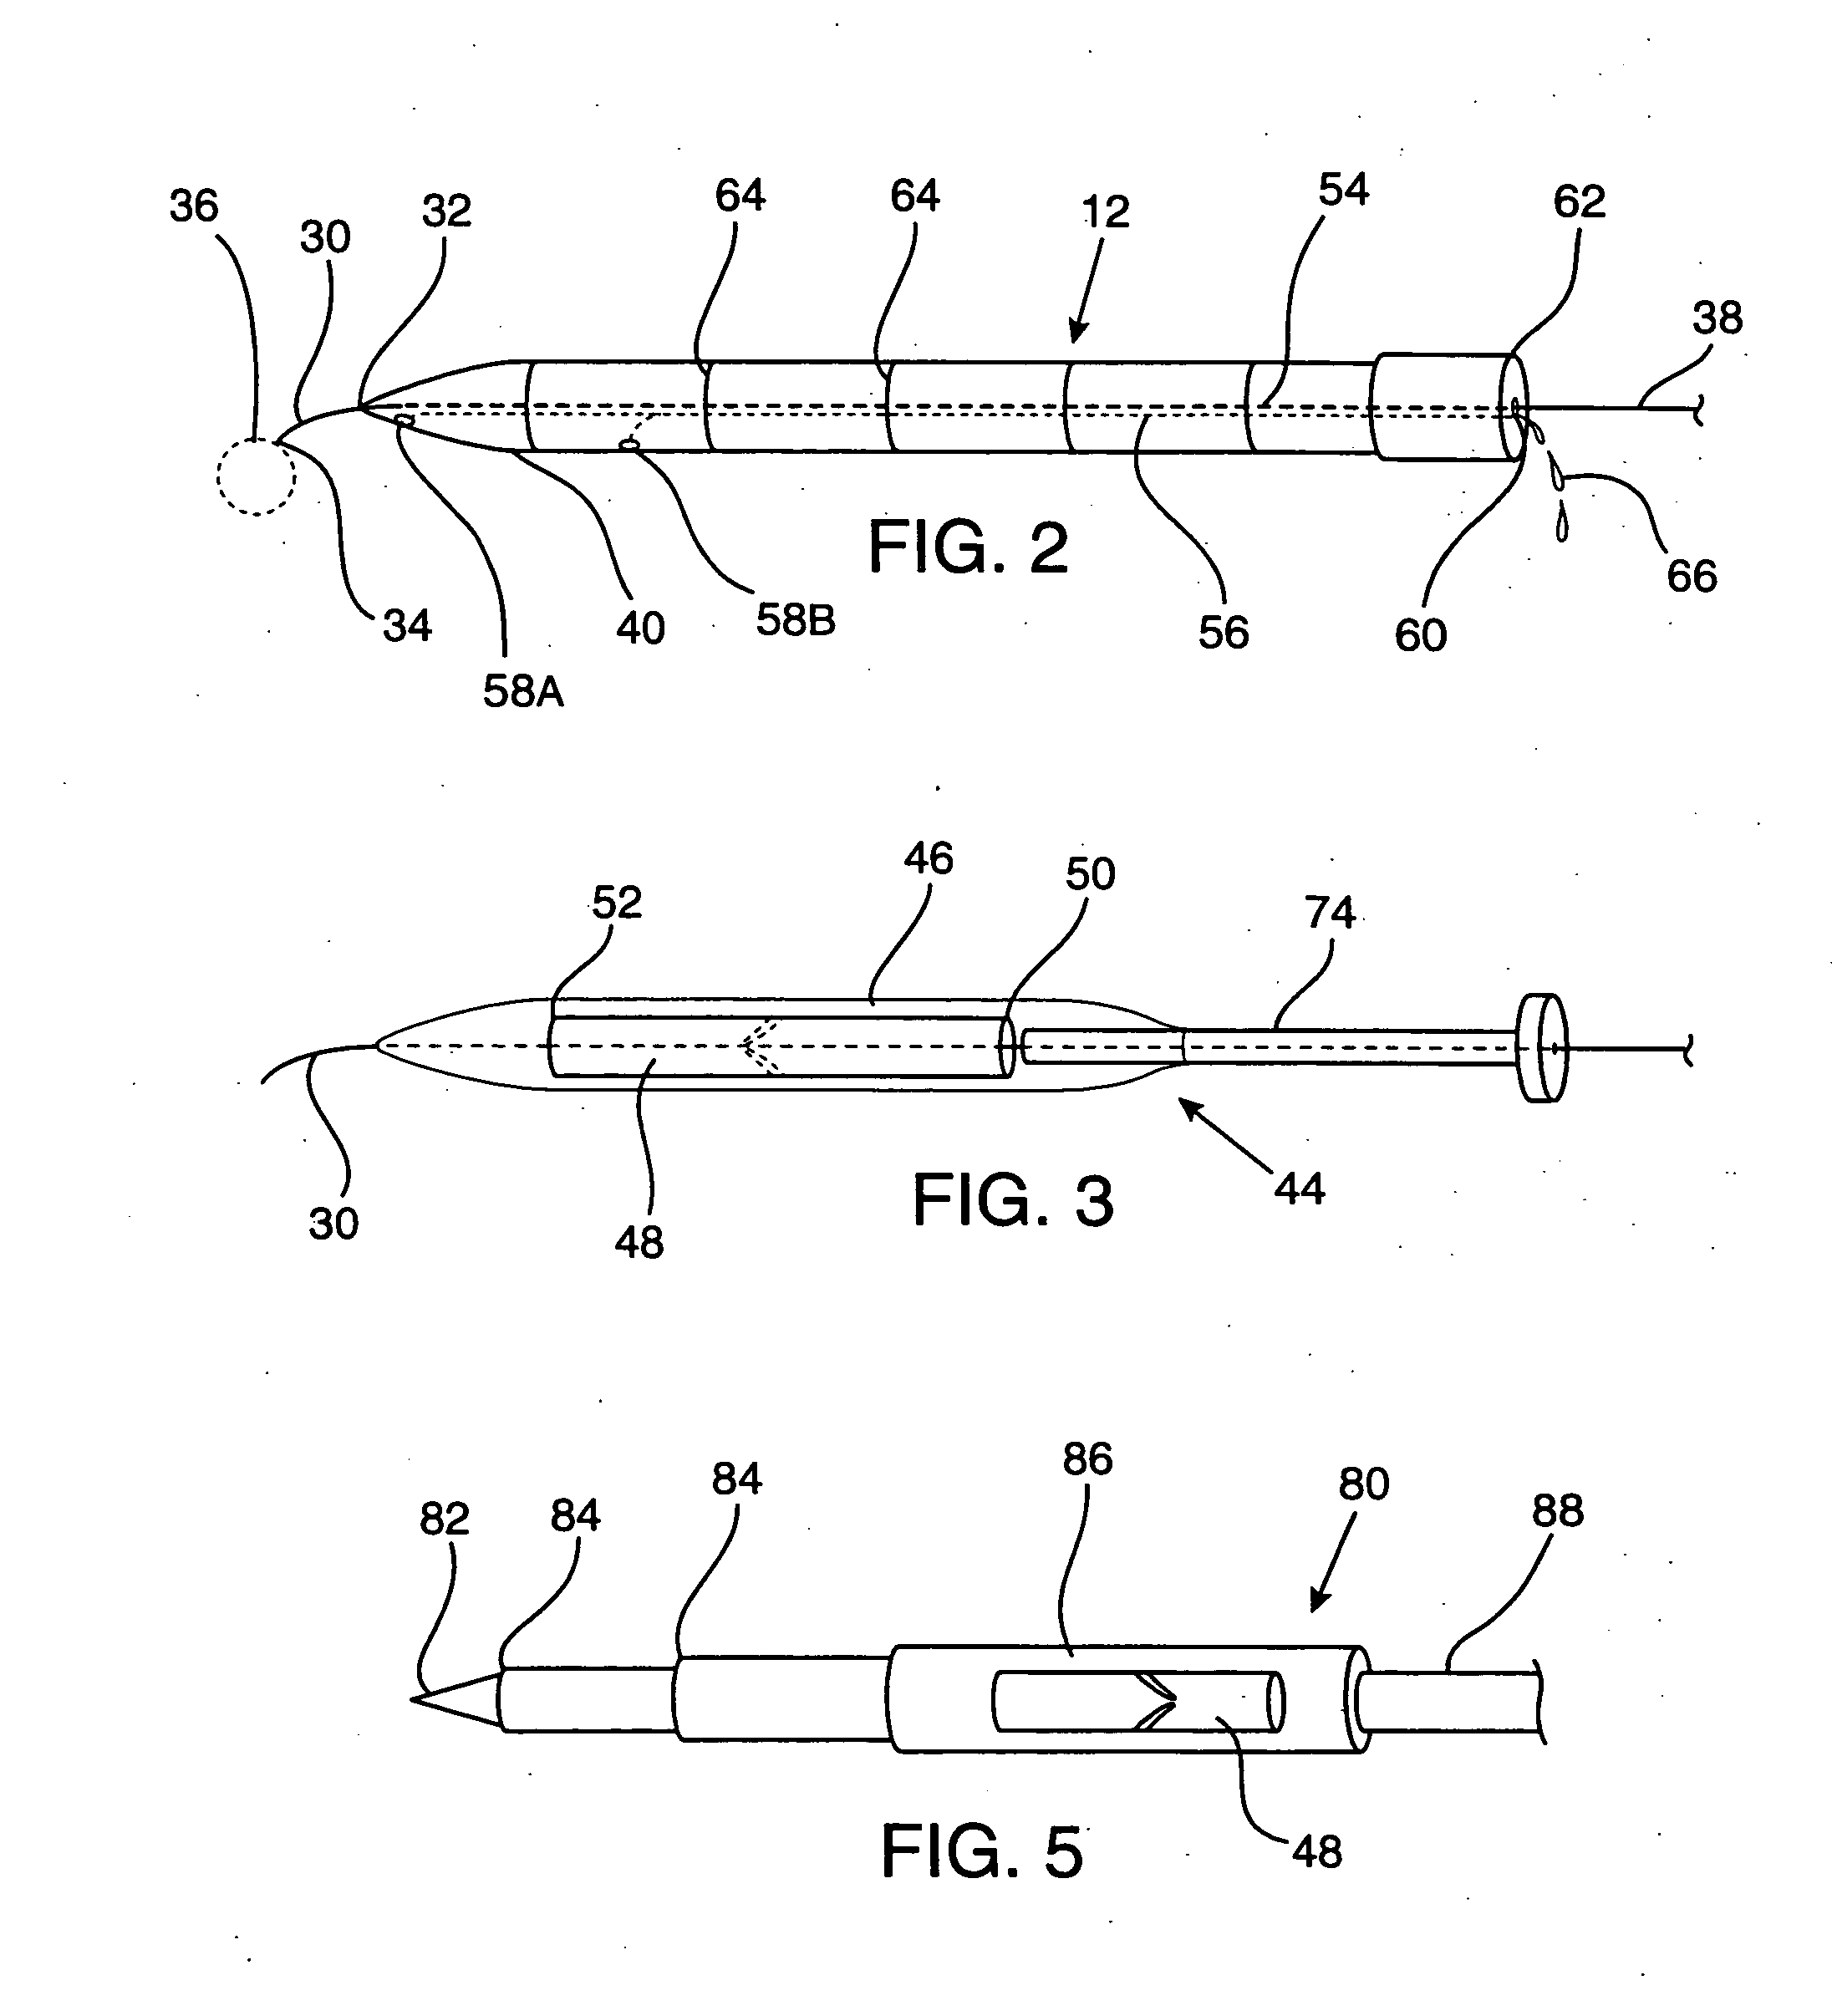 Methods and devices providing transmyocardial blood flow to the arterial vascular system of the heart